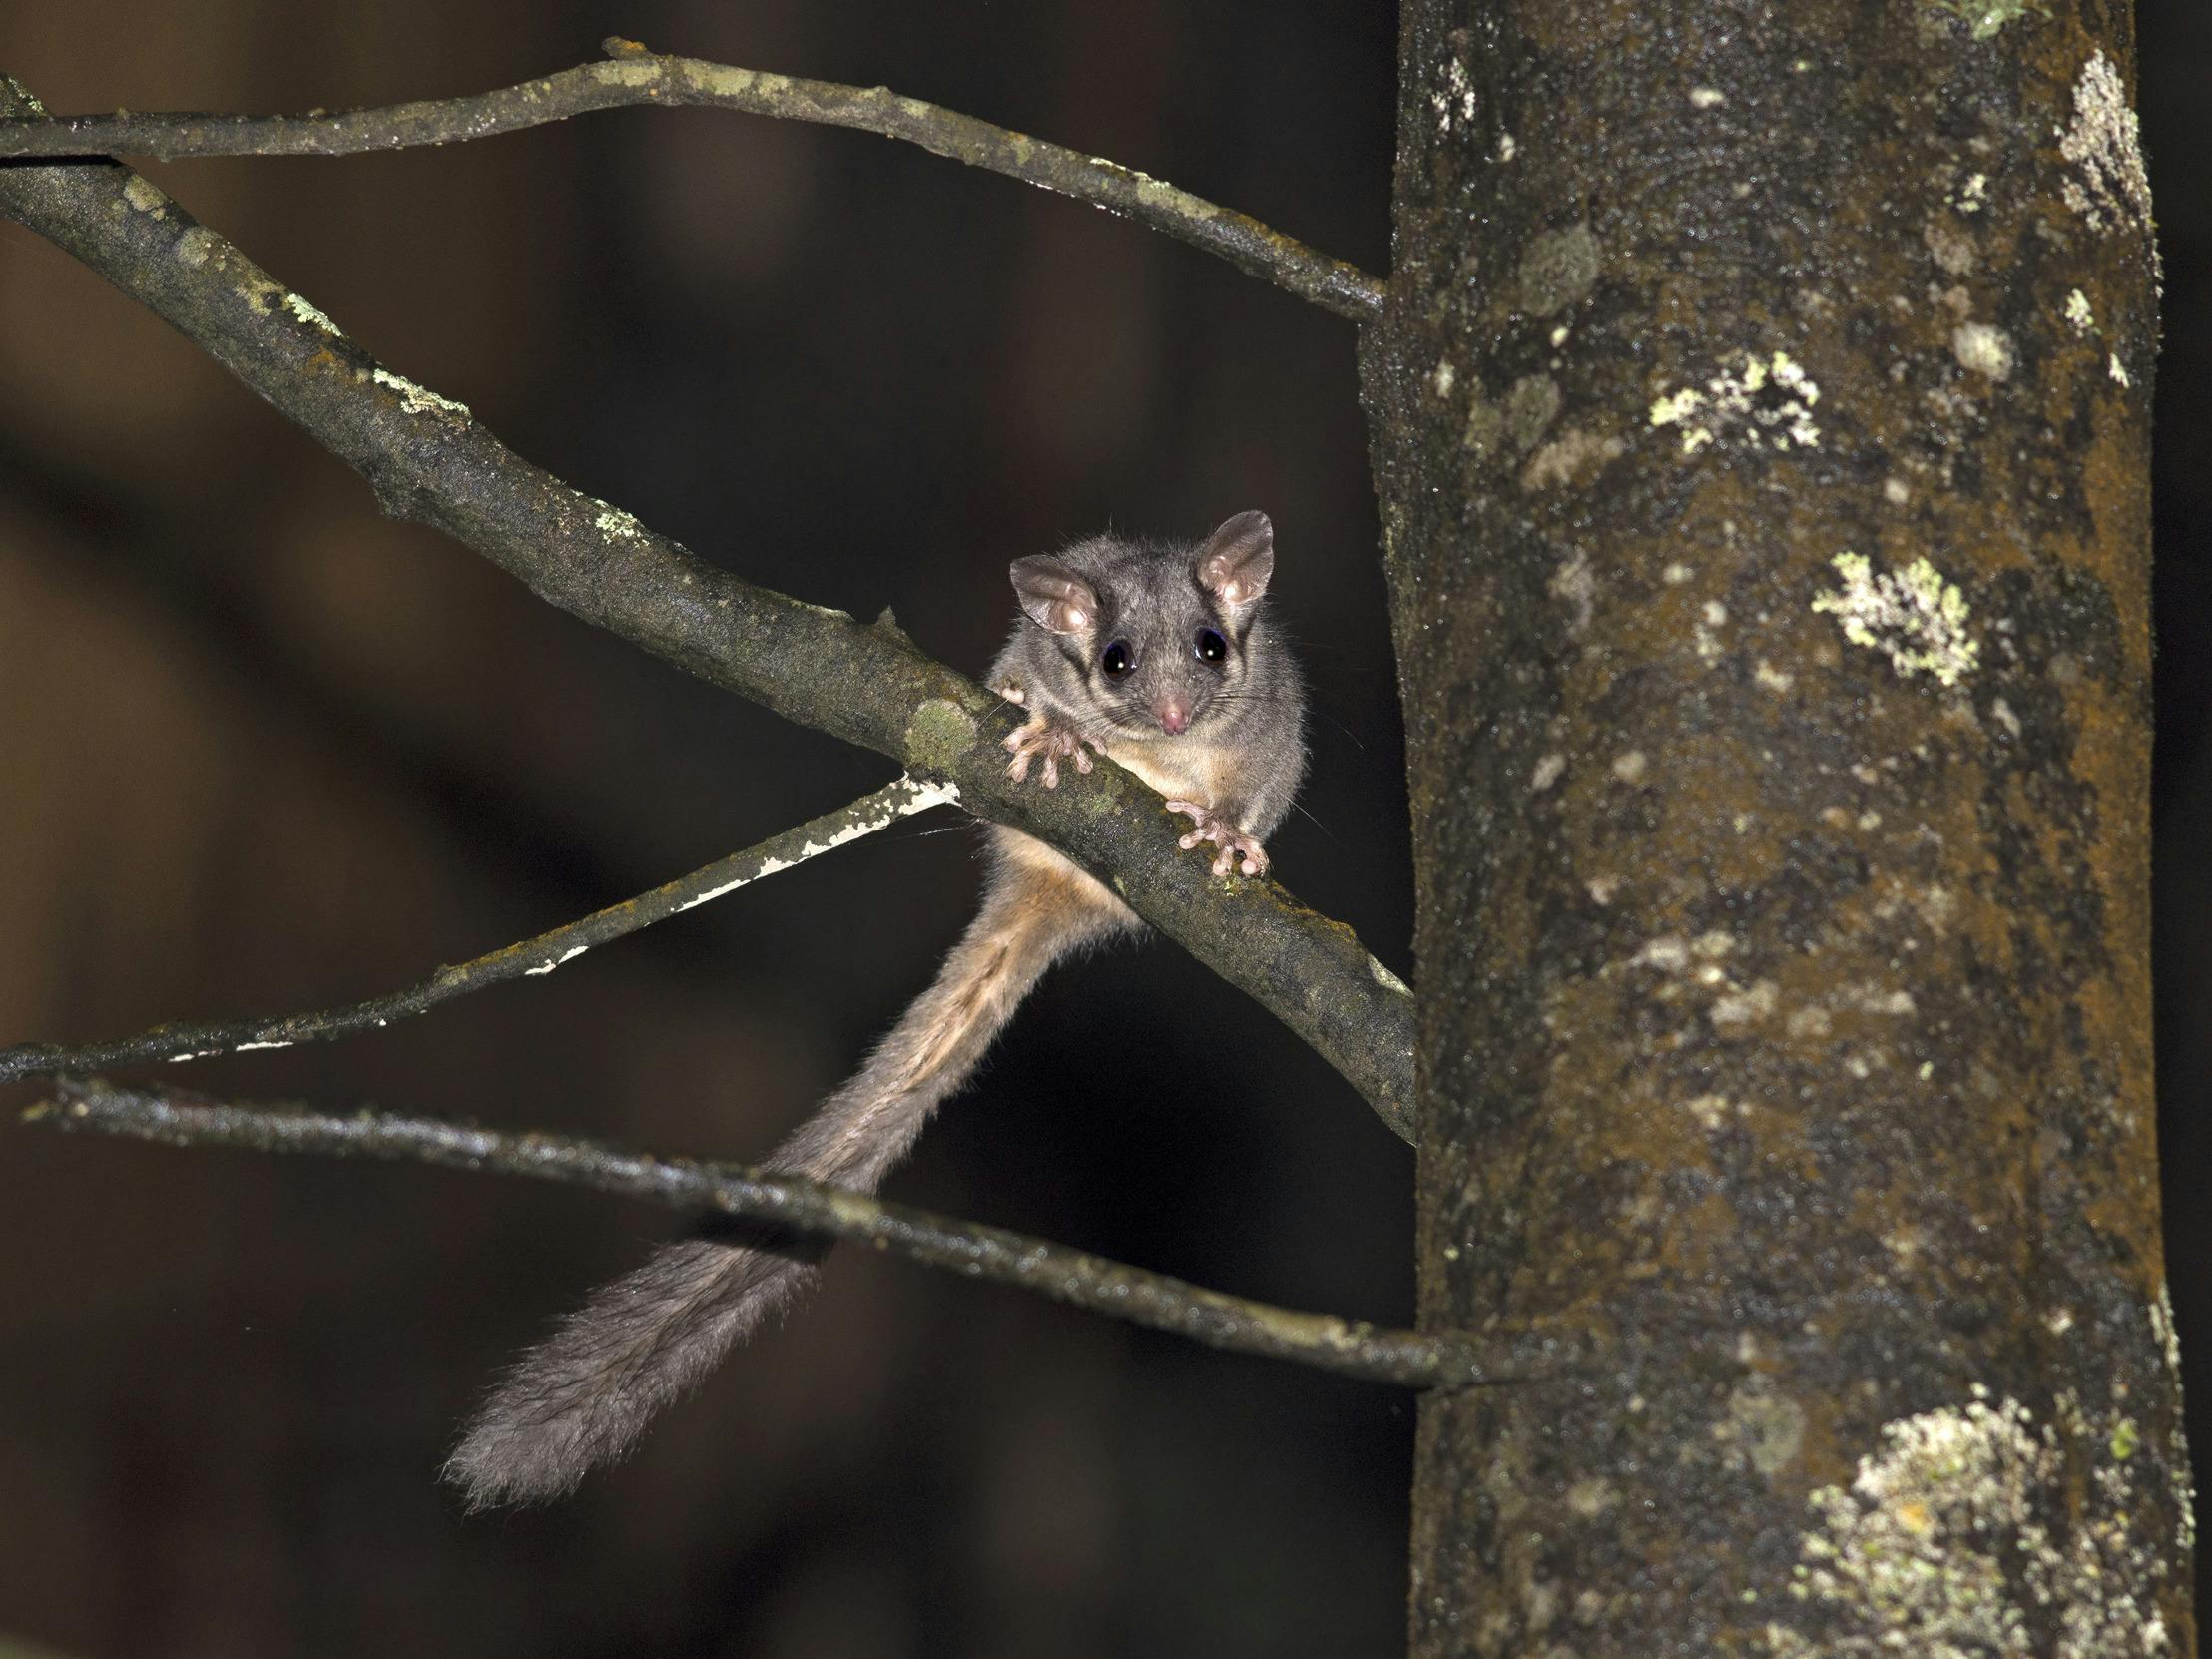 grey coloured greater glider with a long tail sitting on a tree branch pictured with flash at night